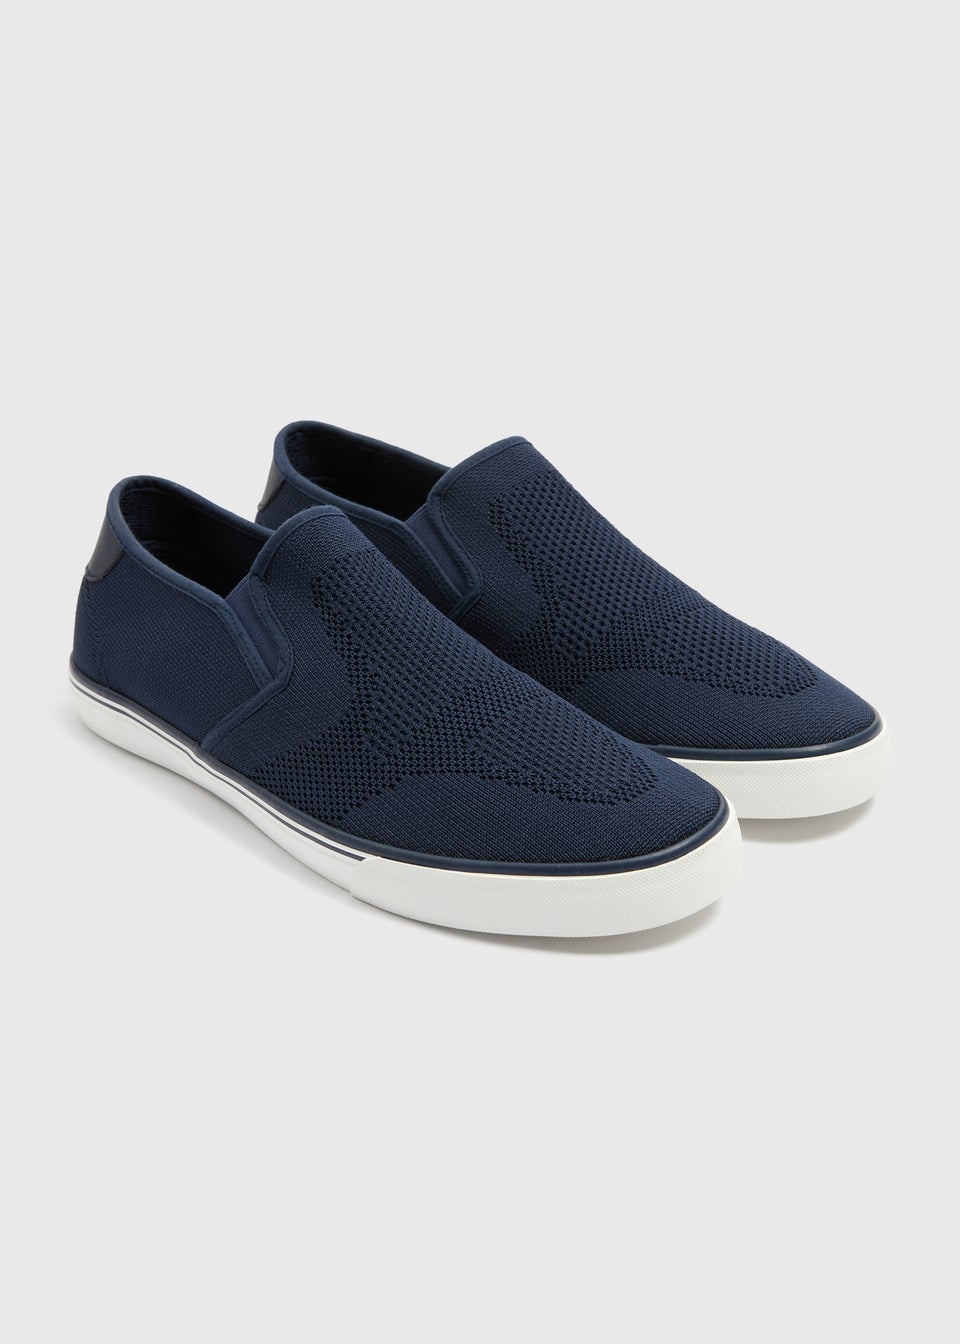 Navy Textured Slip On Pump Shoes